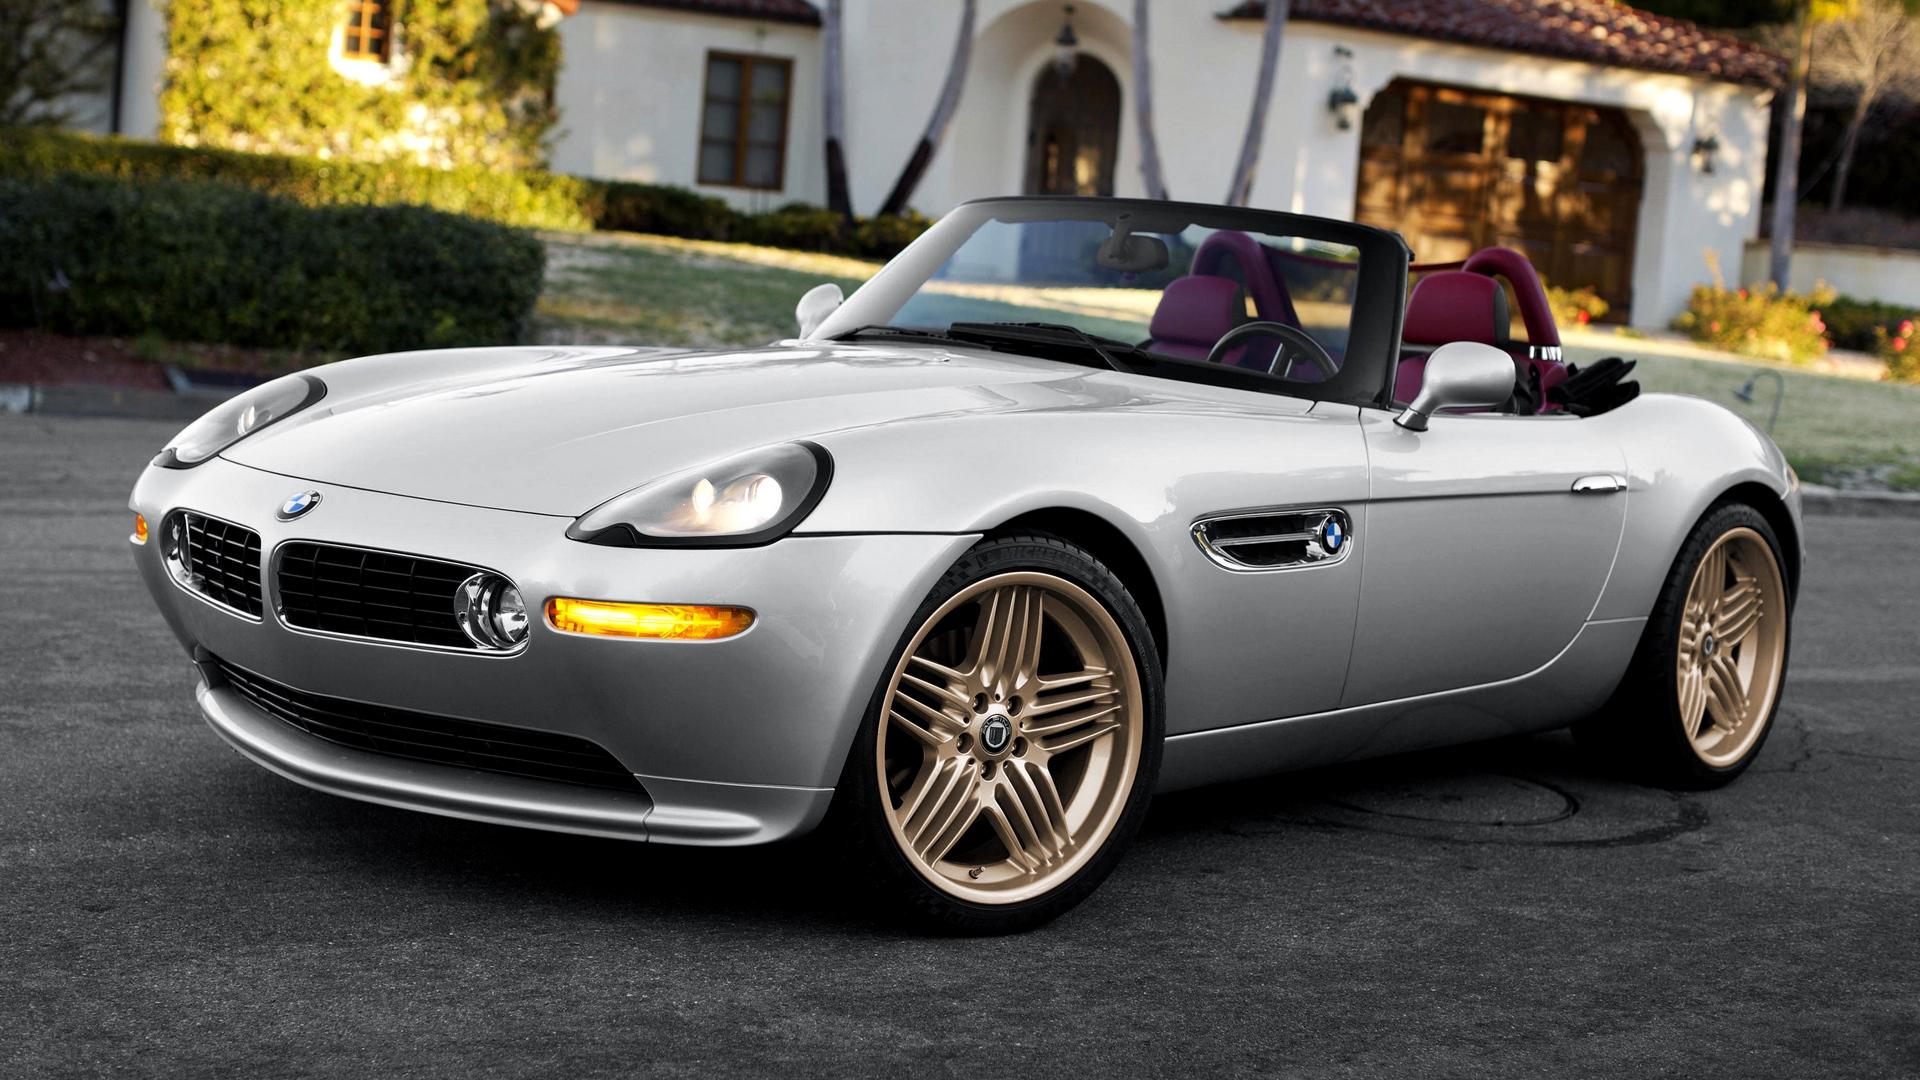 BMW Z8 Wallpapers - Wallpaper Cave